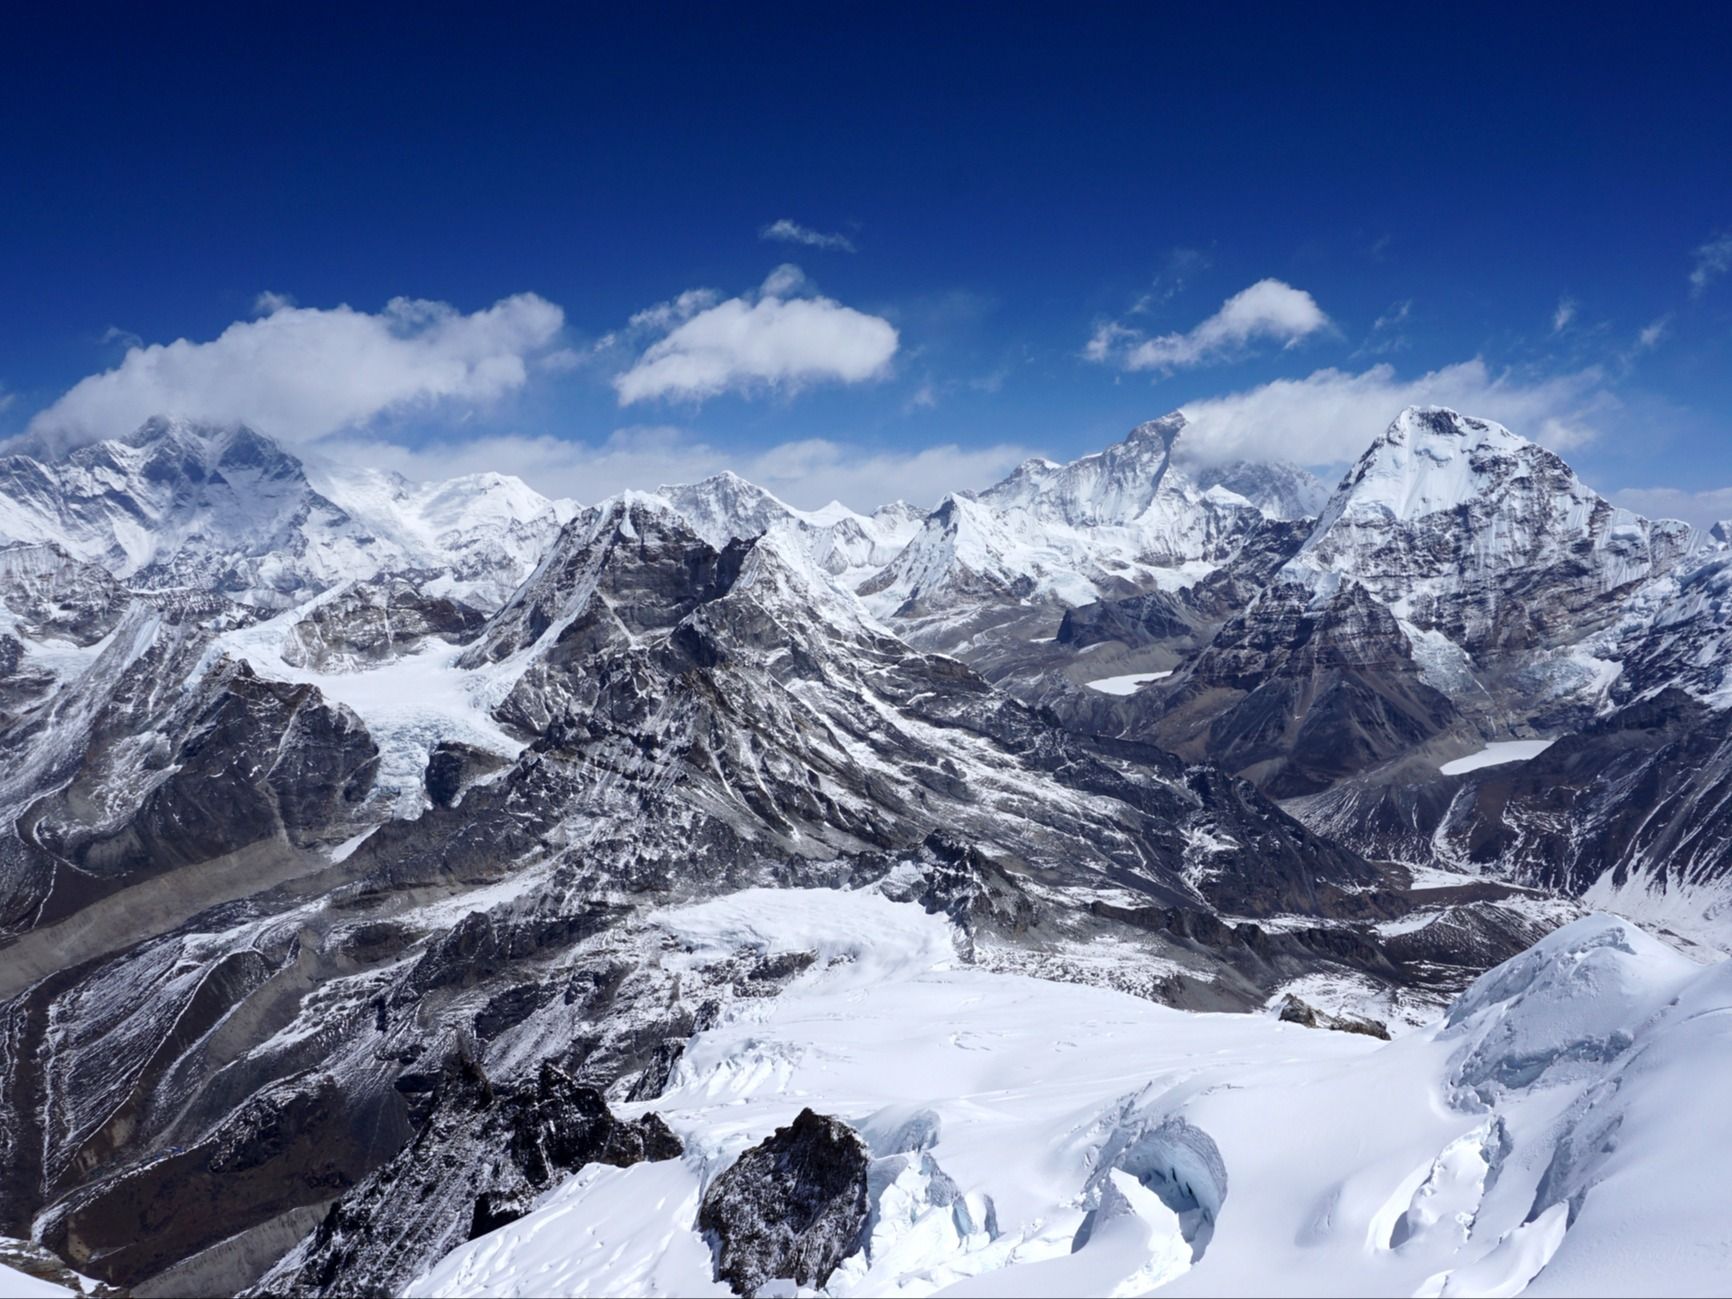 Views from the top of Mera Peak on a clear day. Photo: Getty.